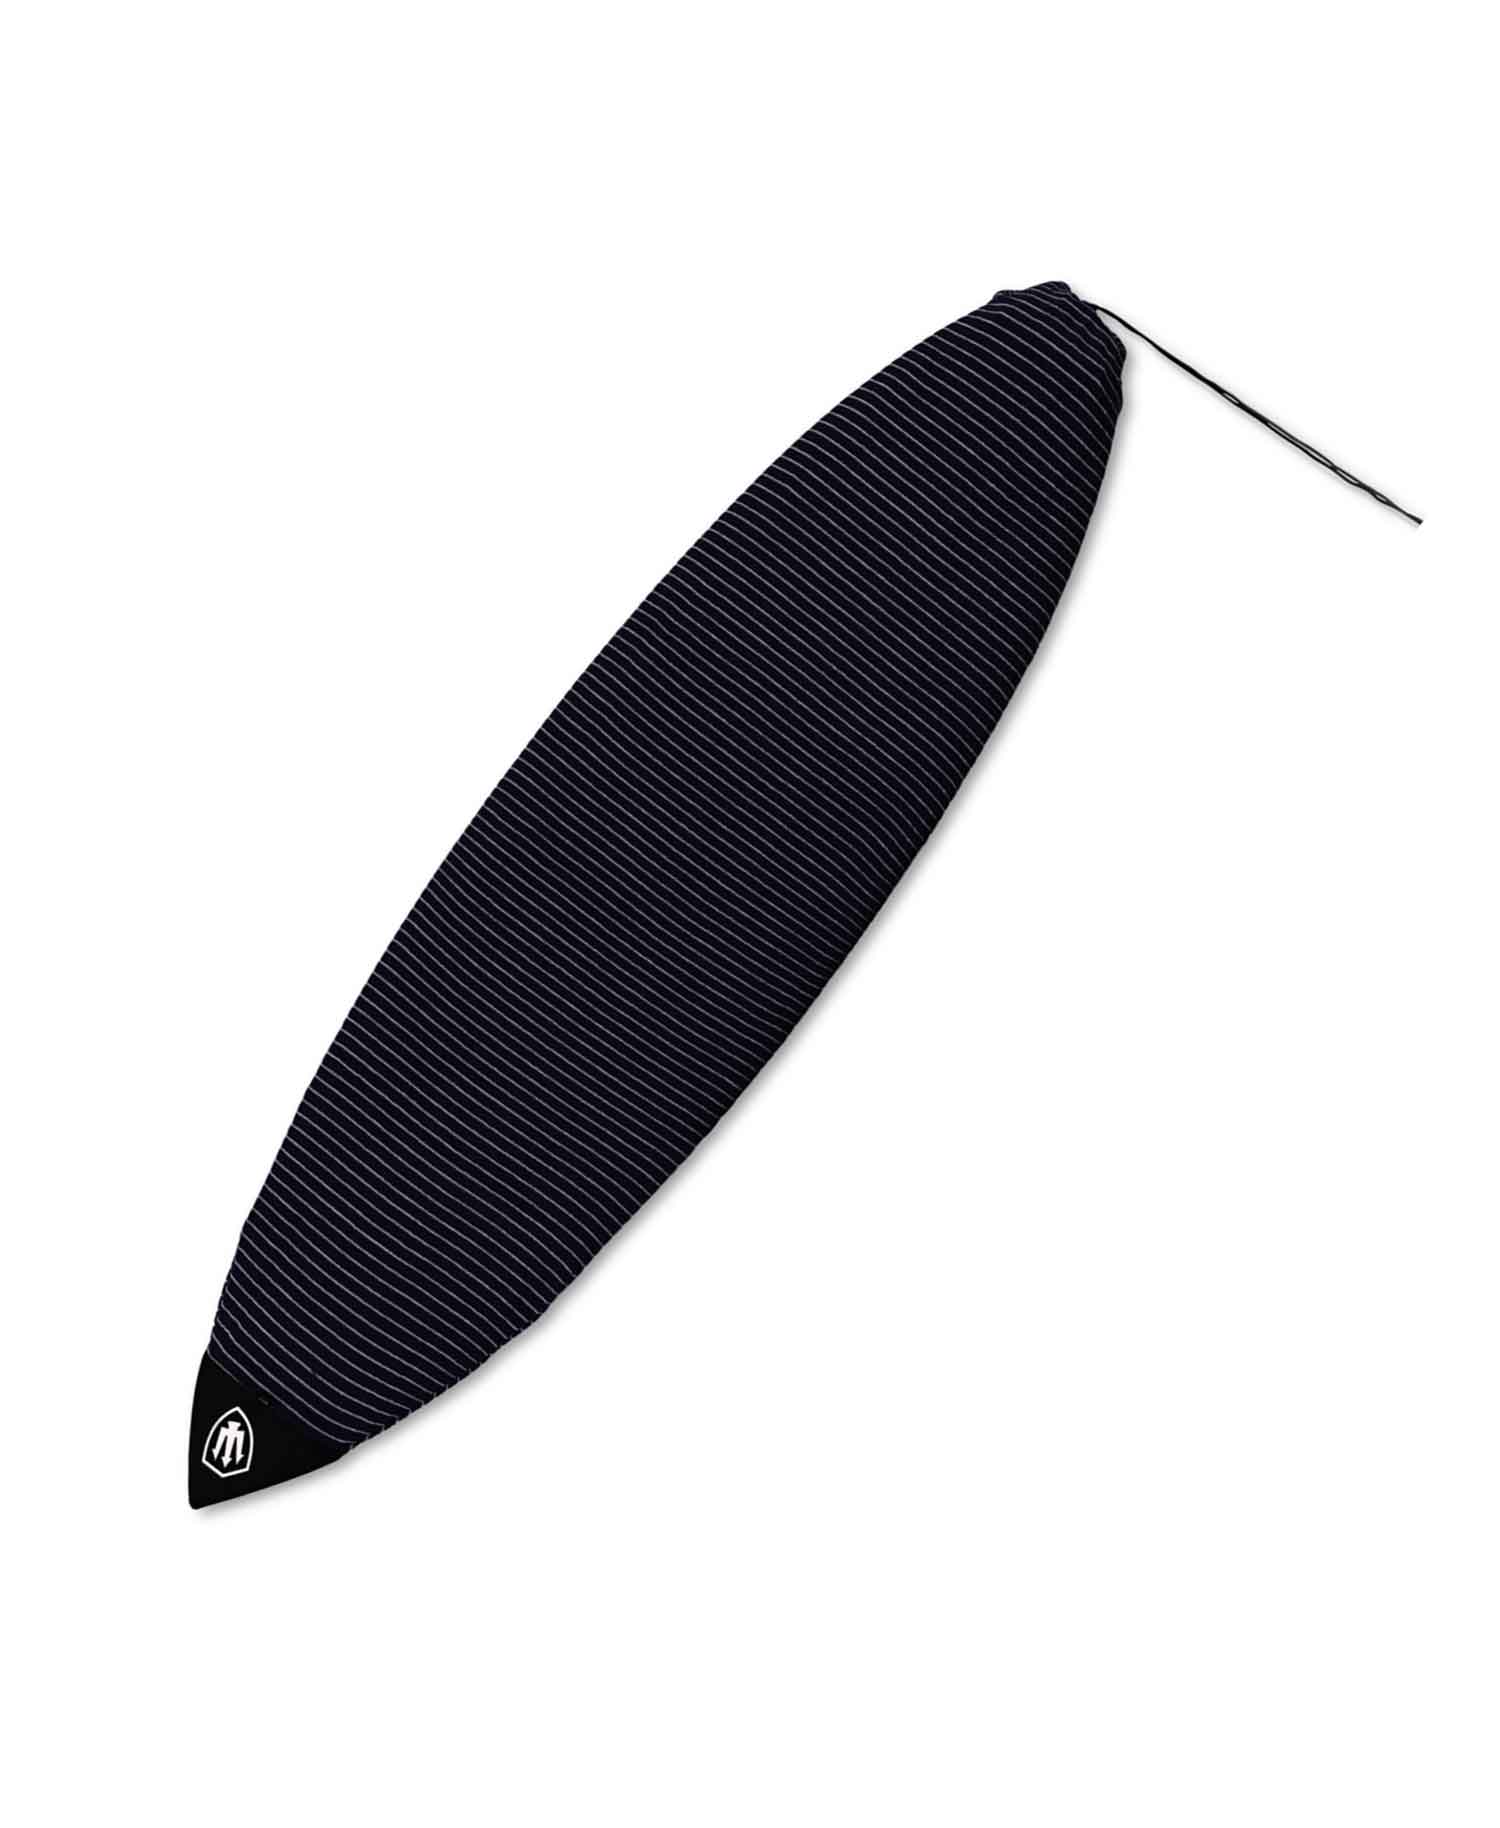 FK SURFBOARD STRETCH COVER